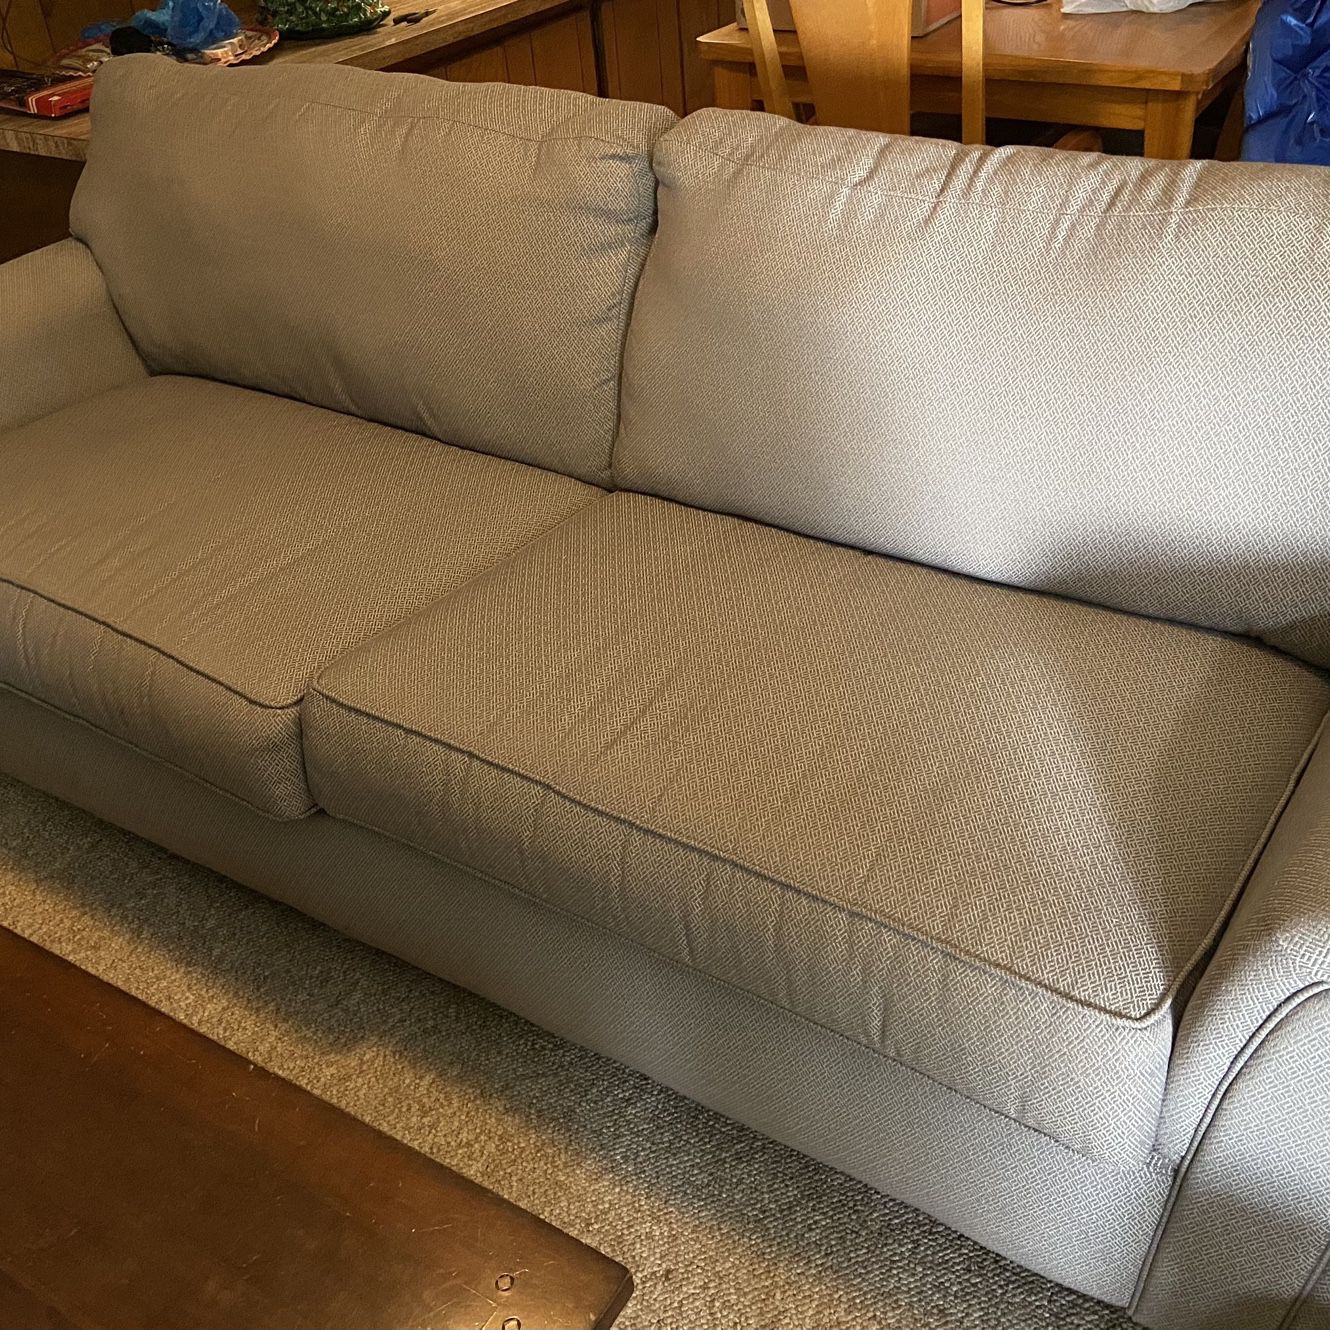 Couch, Chair & Ottoman $300 OBO